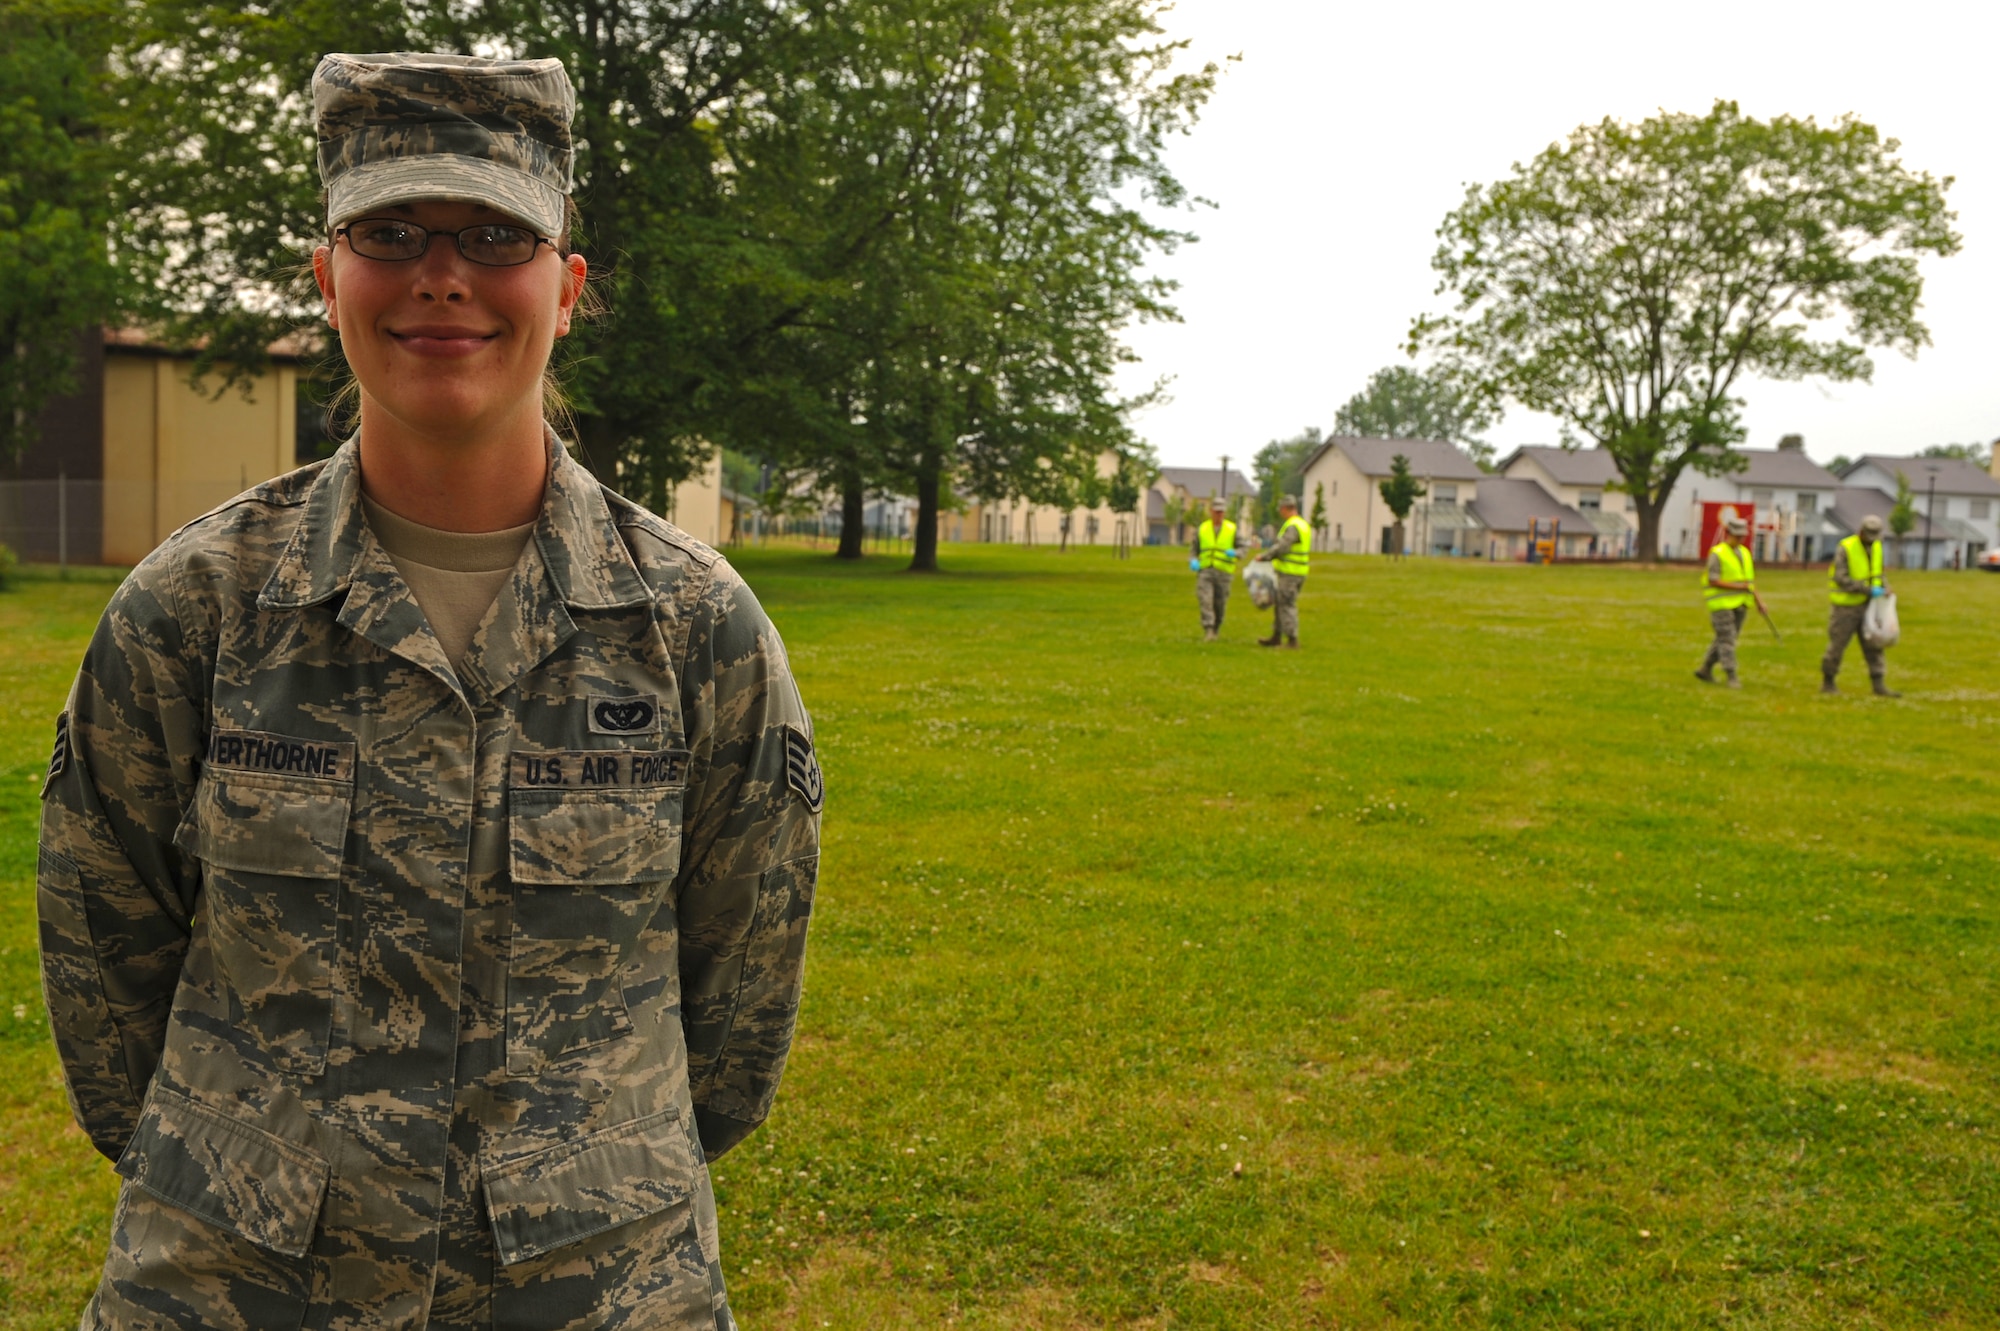 SPANGDAHLEM AIR BASE, Germany -- Staff Sgt. Deborah Silverthorne, 52nd Civil Engineer Squadron NCO in charge of Eifel Pride, is the Super Saber Performer for the week of June 21 – 27. (U.S. Air Force photo by Airman 1st Class Matthew B. Fredericks/Released)